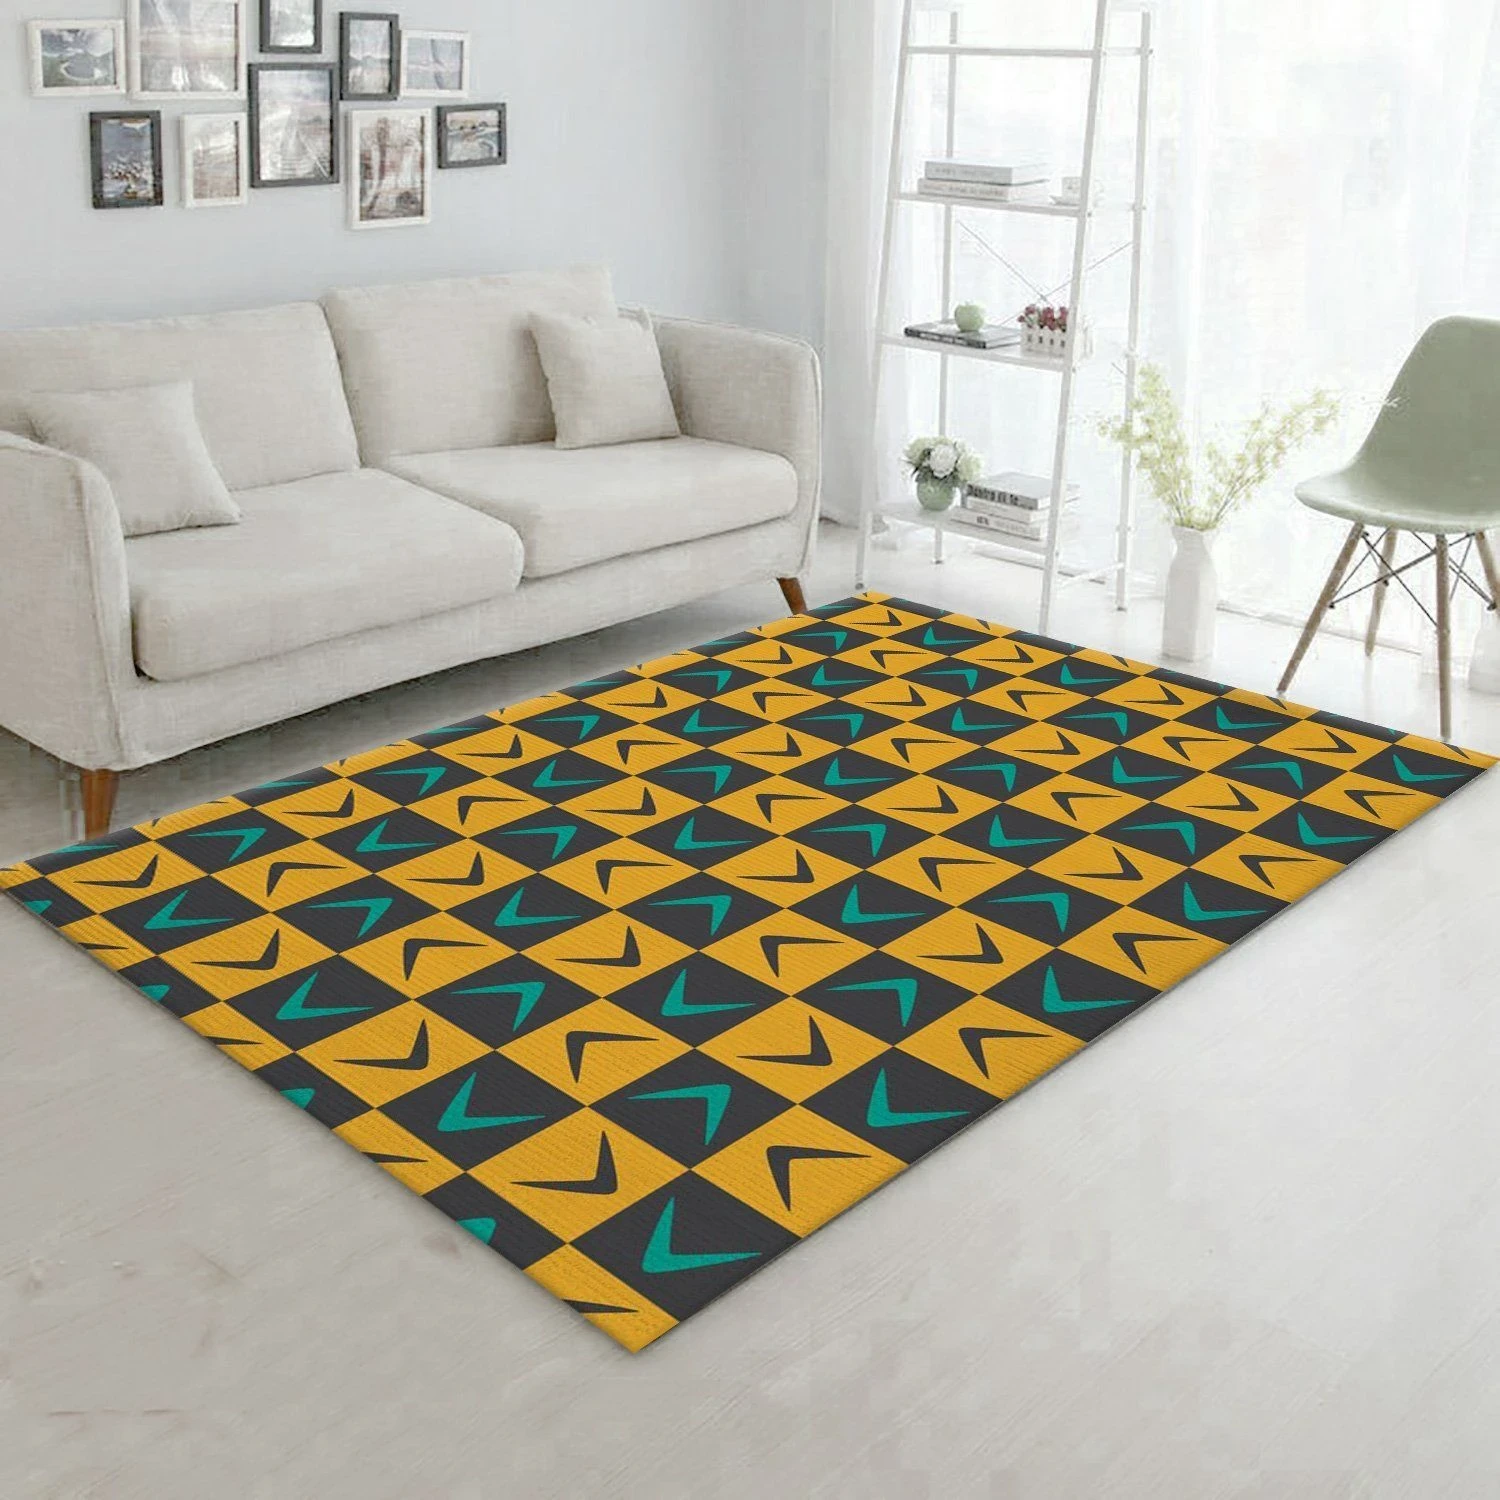 Midcentury Pattern 47 Area Rug Carpet, Living room and bedroom Rug, Family Gift US Decor - Indoor Outdoor Rugs